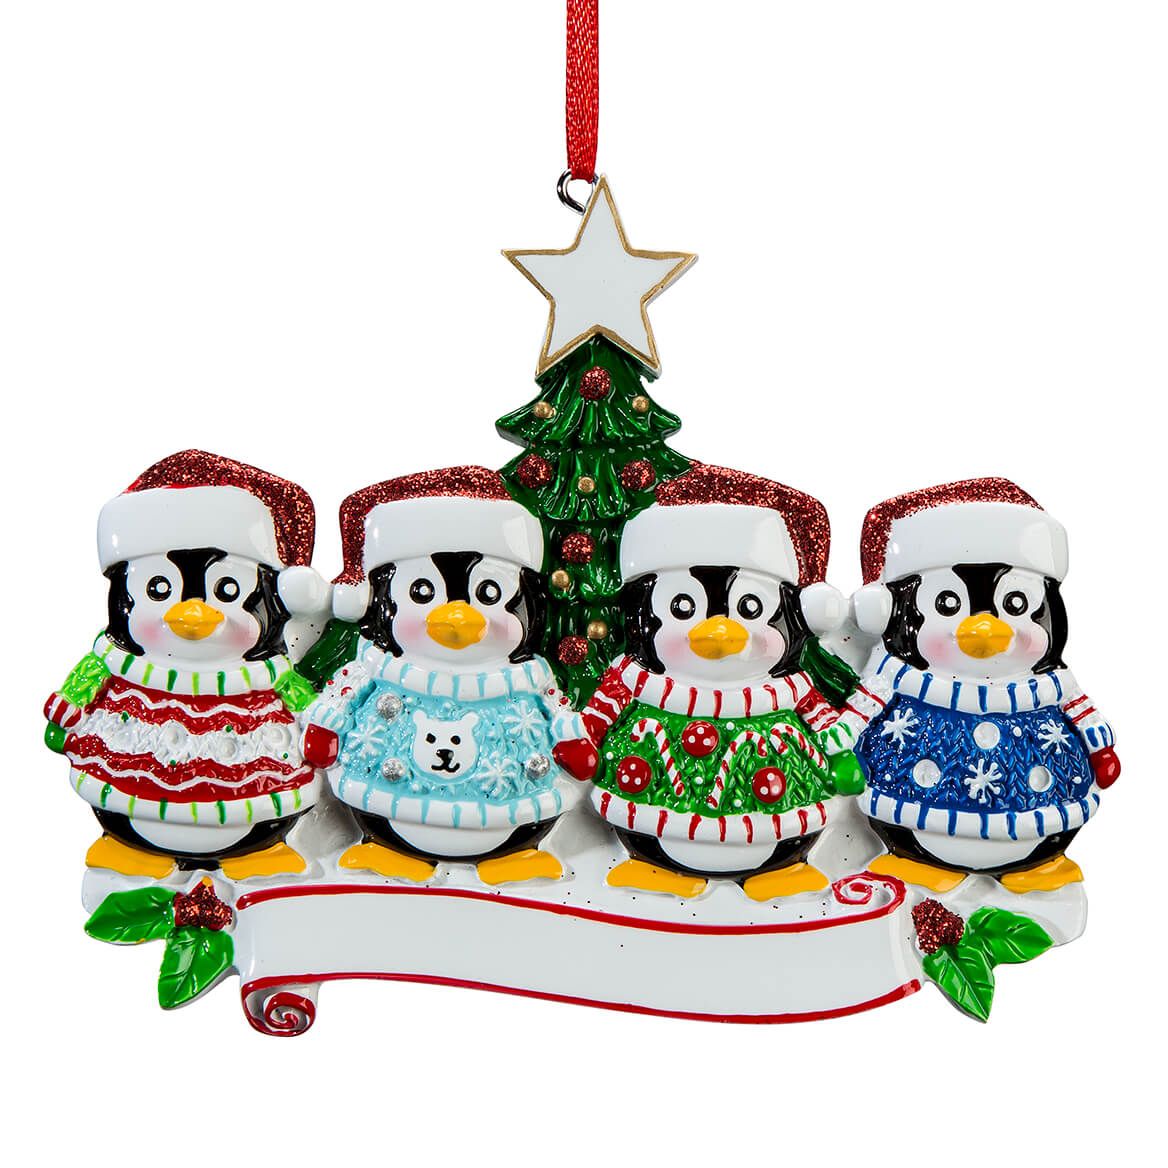 Penguins in Ugly Sweaters Ornament, Family of 4 + '-' + 364969